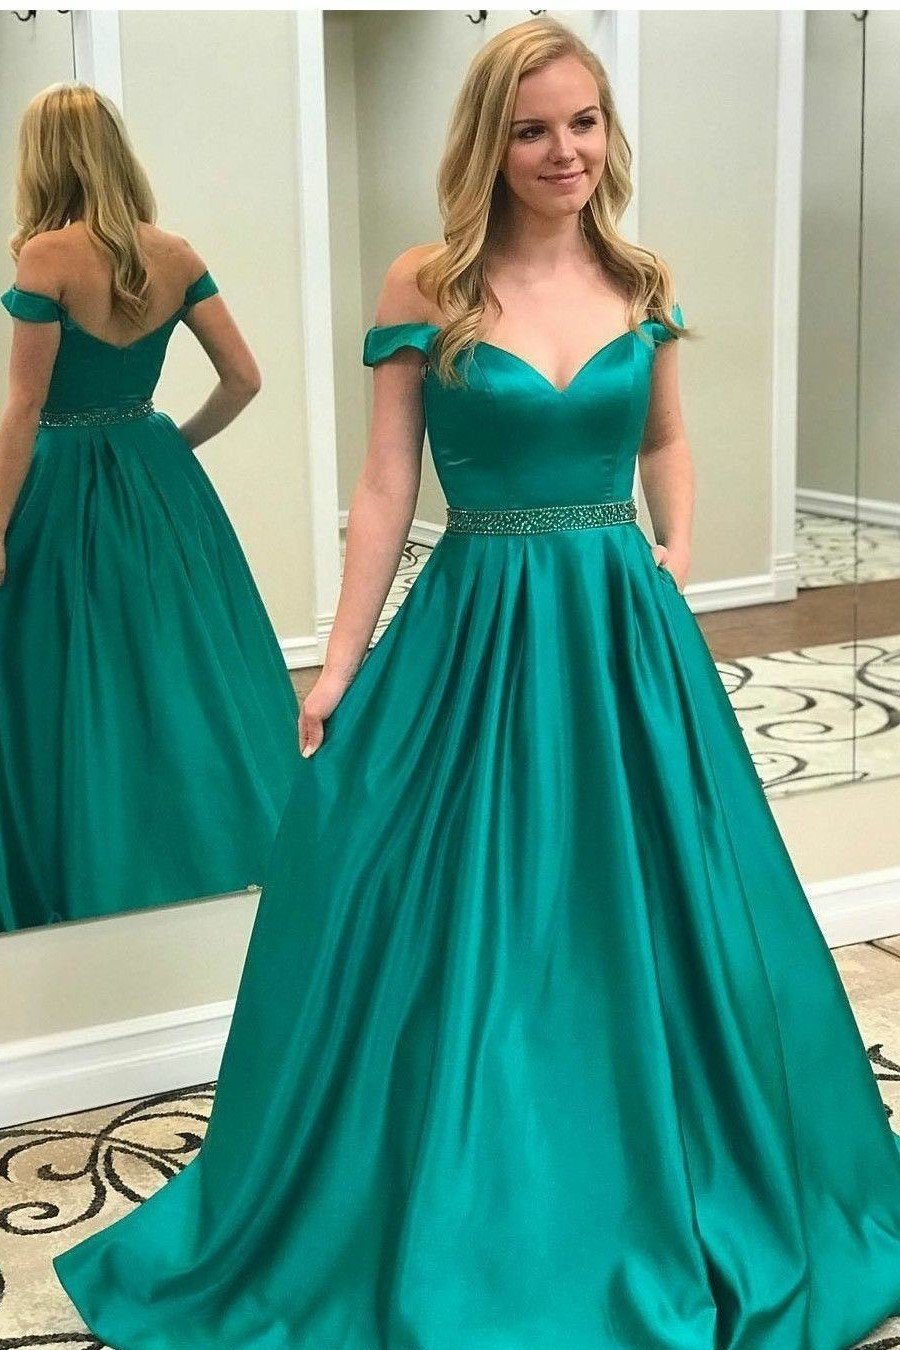 Green Prom Dress Off The shoulder Straps, Prom Dresses, Pageant Dress, Evening Dress, Ball Dance Dresses, Graduation School Party Gown